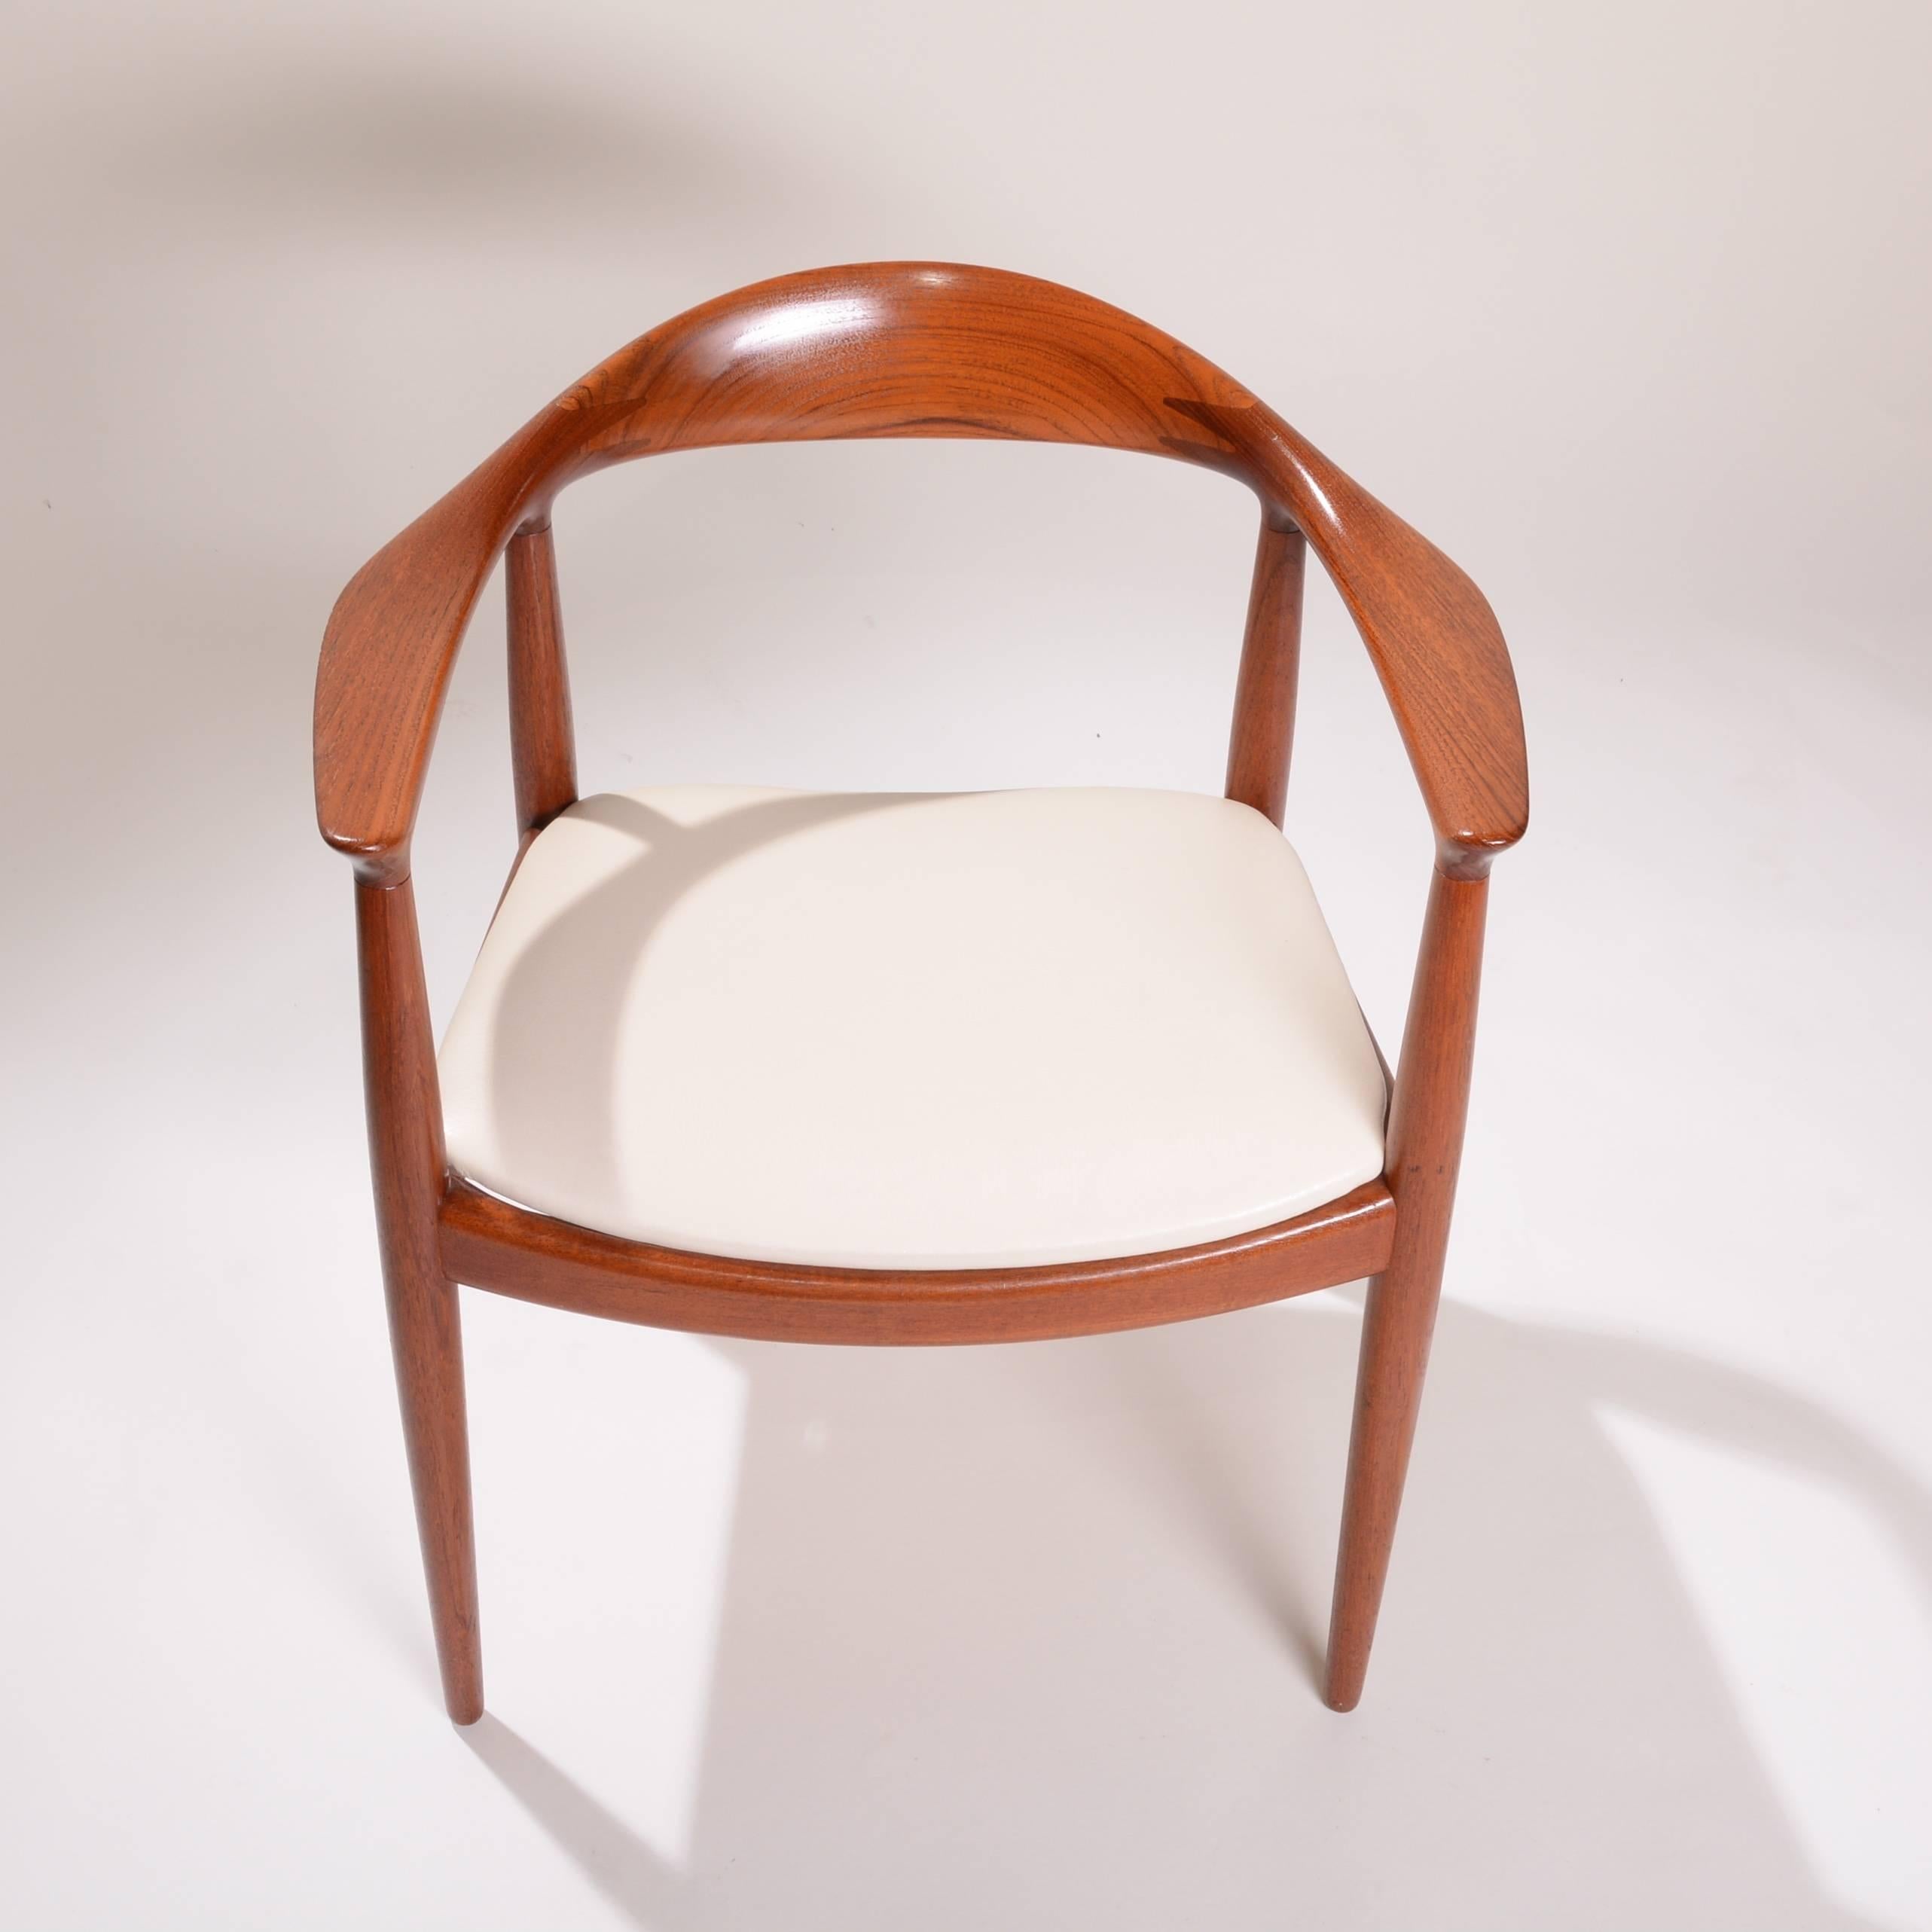 Set of 7 Hans Wegner JH-503 chairs designed in 1949 and Produced by Johannes Hansen.  Solid teak construction. Excellent original condition. Stamped with the maker's mark.  
Price includes the leather shown or customers choice of leather or fabric.